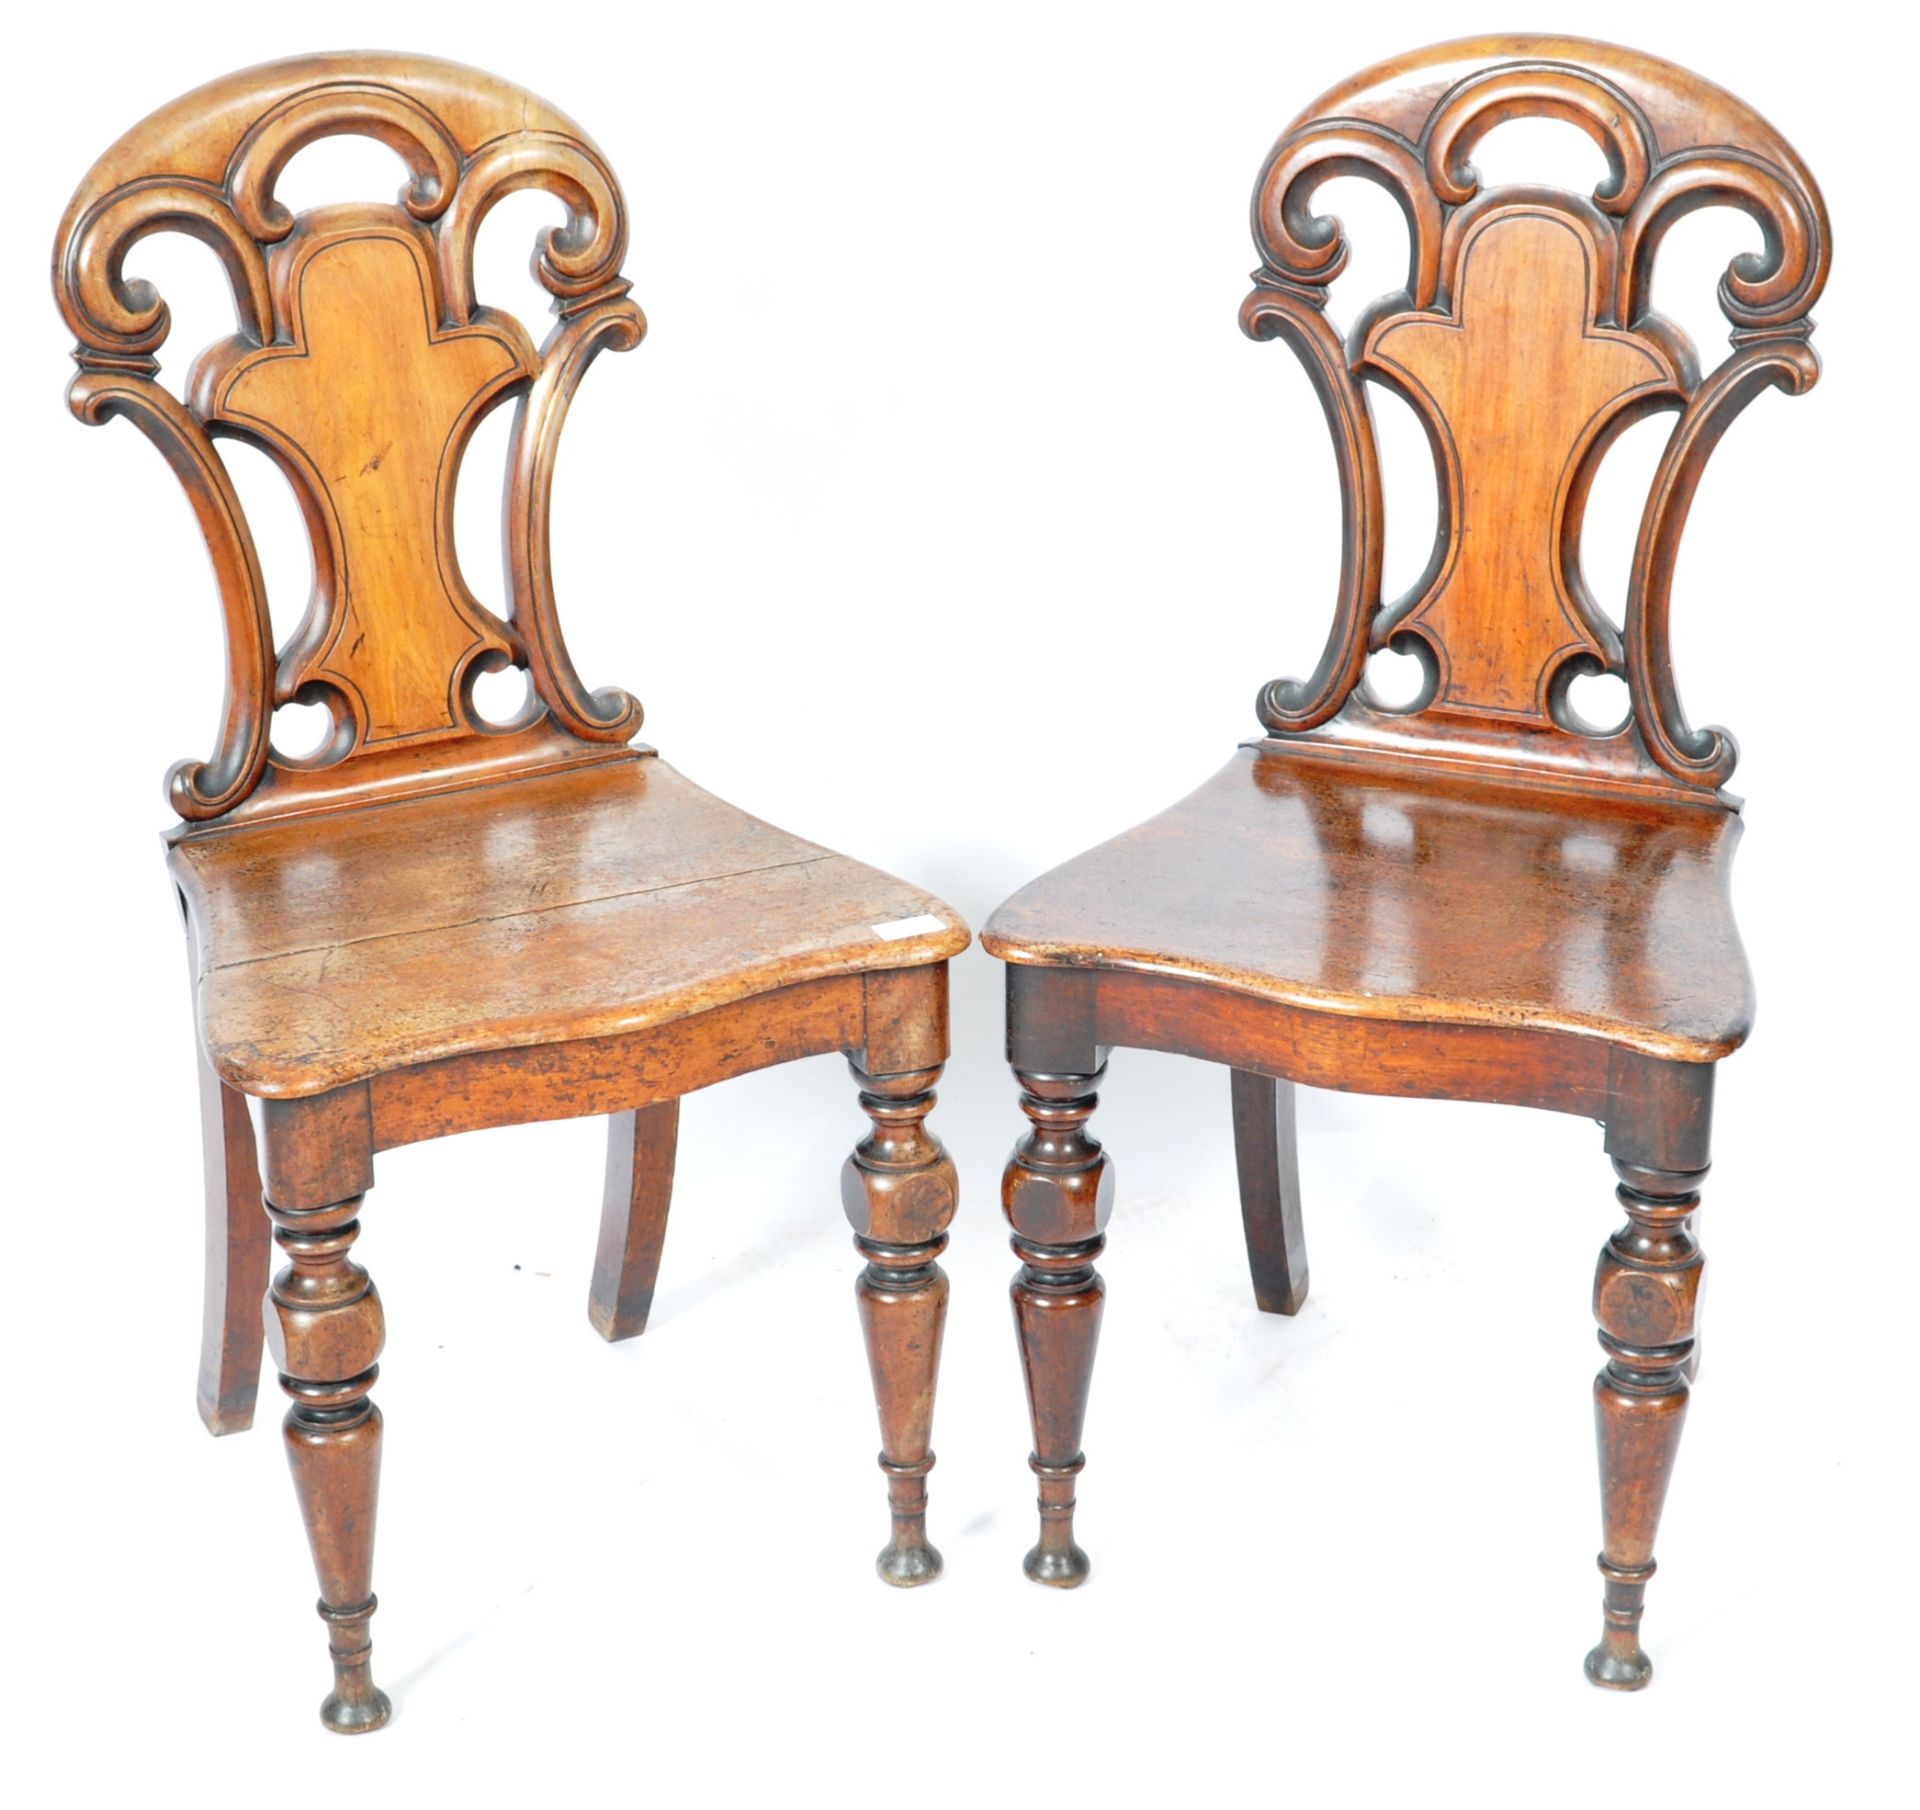 MATCHING PAIR OF VICTORIAN MAHOGANY CARVED HALL CHAIRS - Image 2 of 8